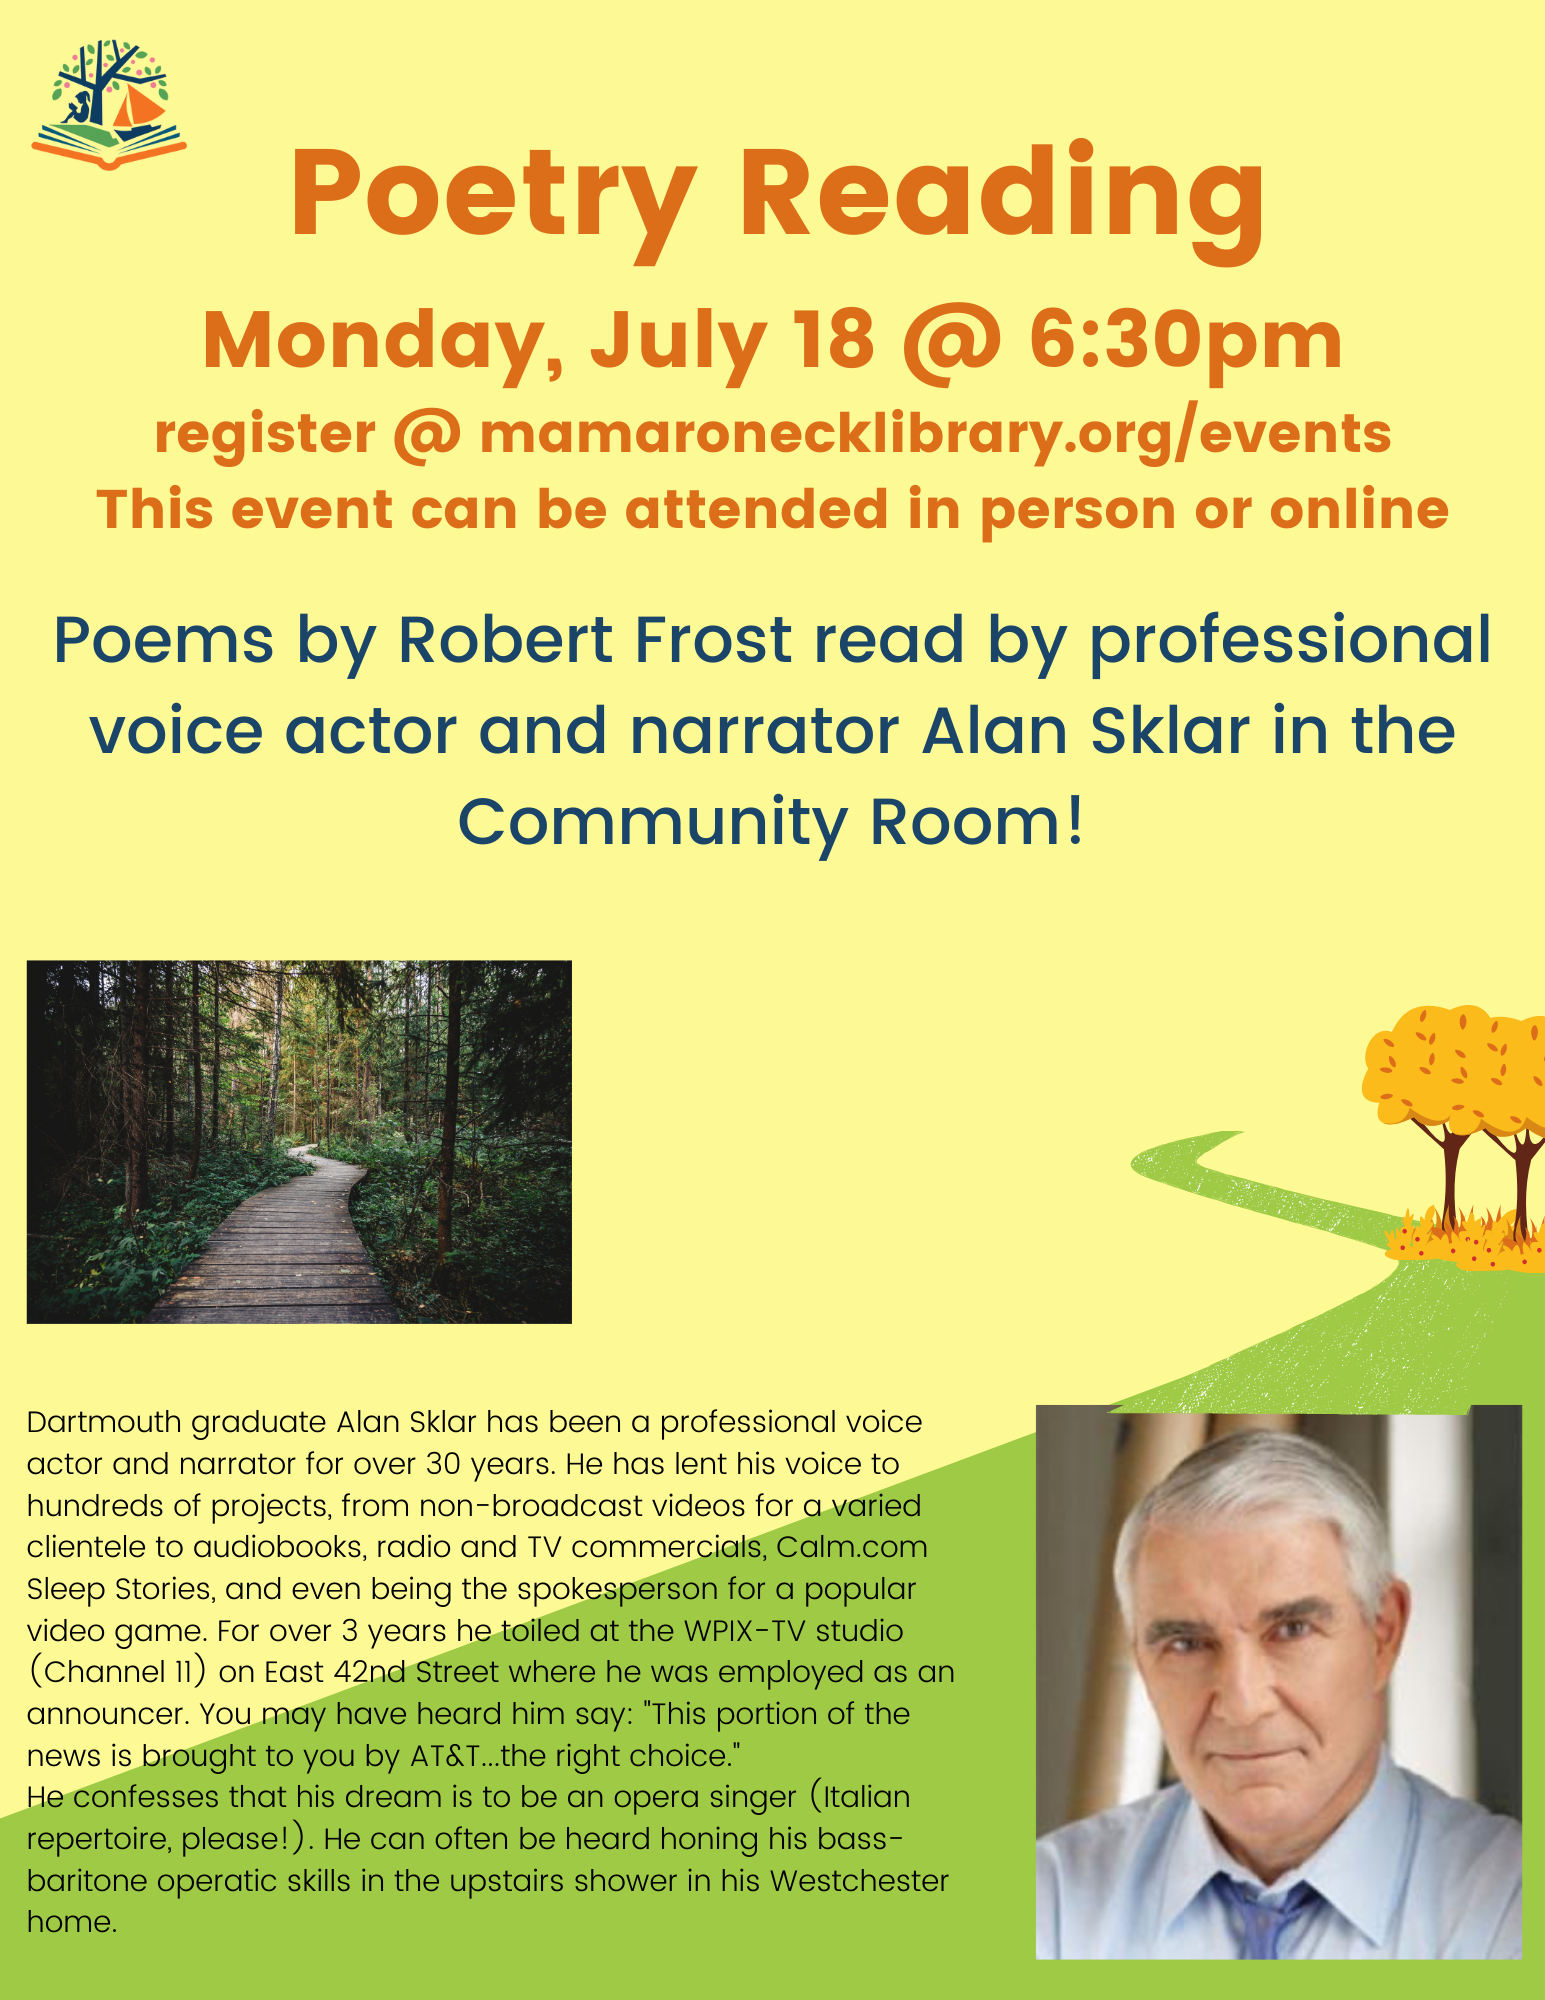 Alan Sklar reads the poetry of Robert Frost July 18